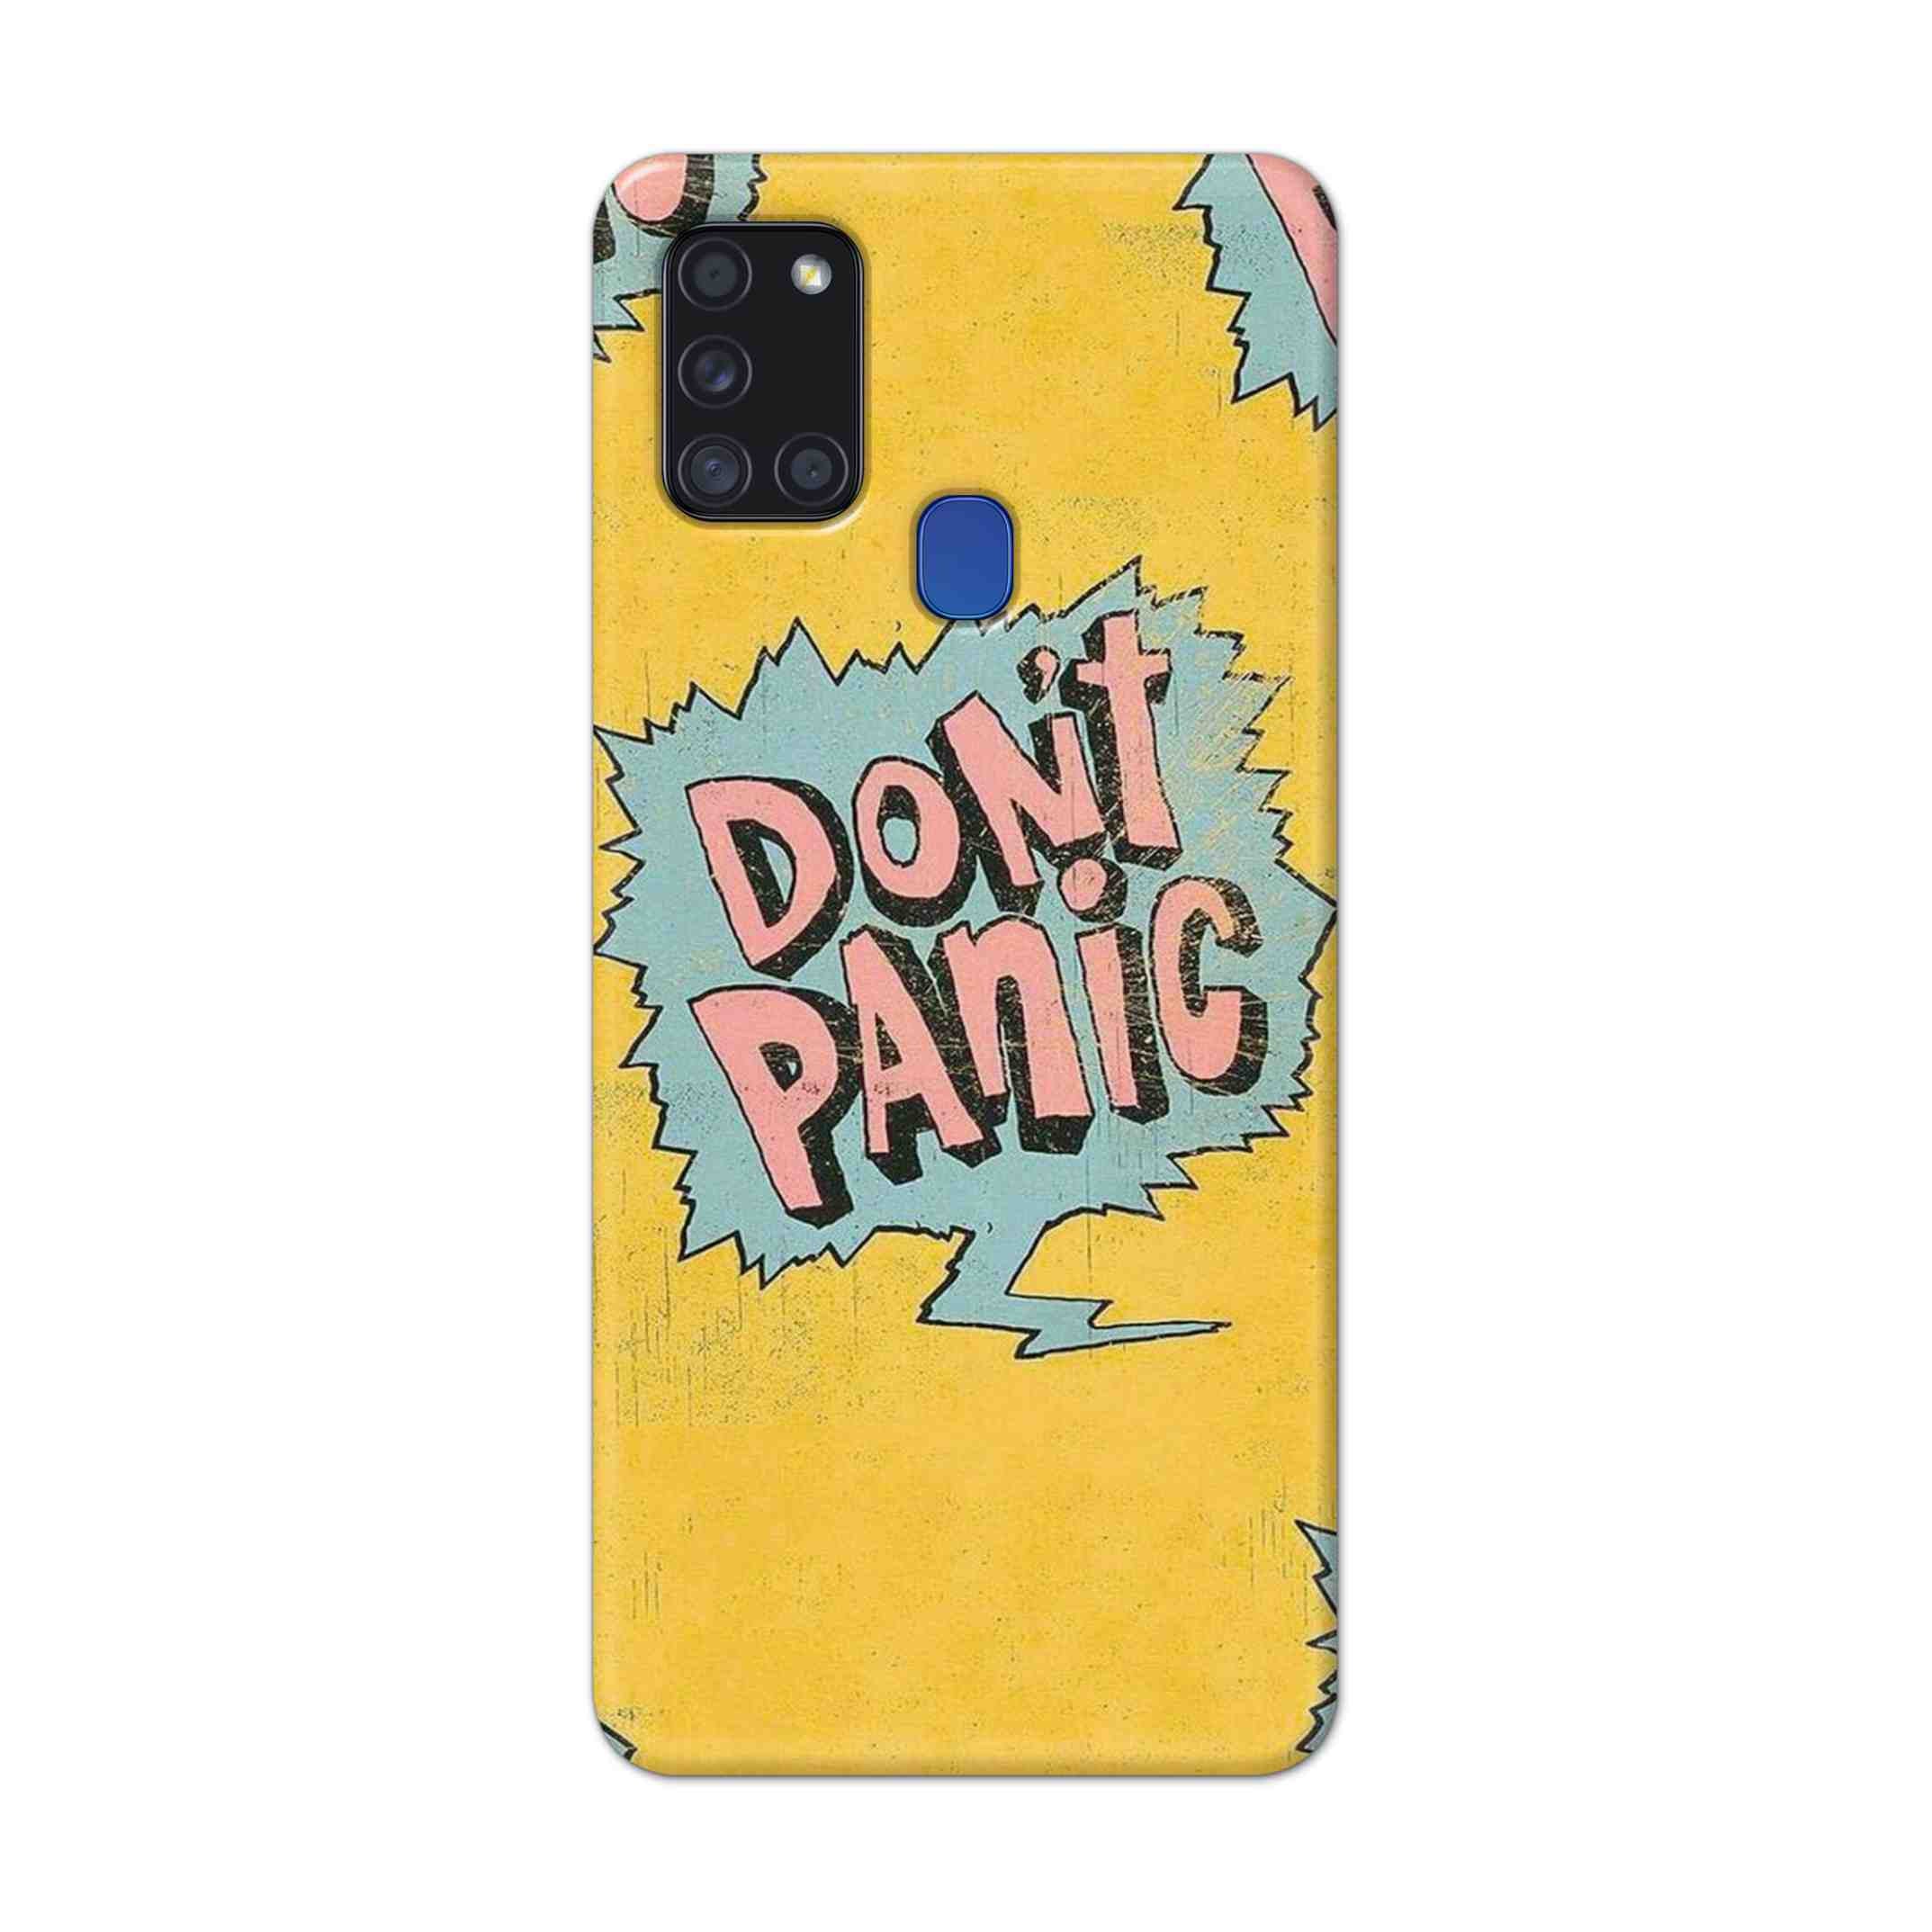 Buy Do Not Panic Hard Back Mobile Phone Case Cover For Samsung Galaxy A21s Online